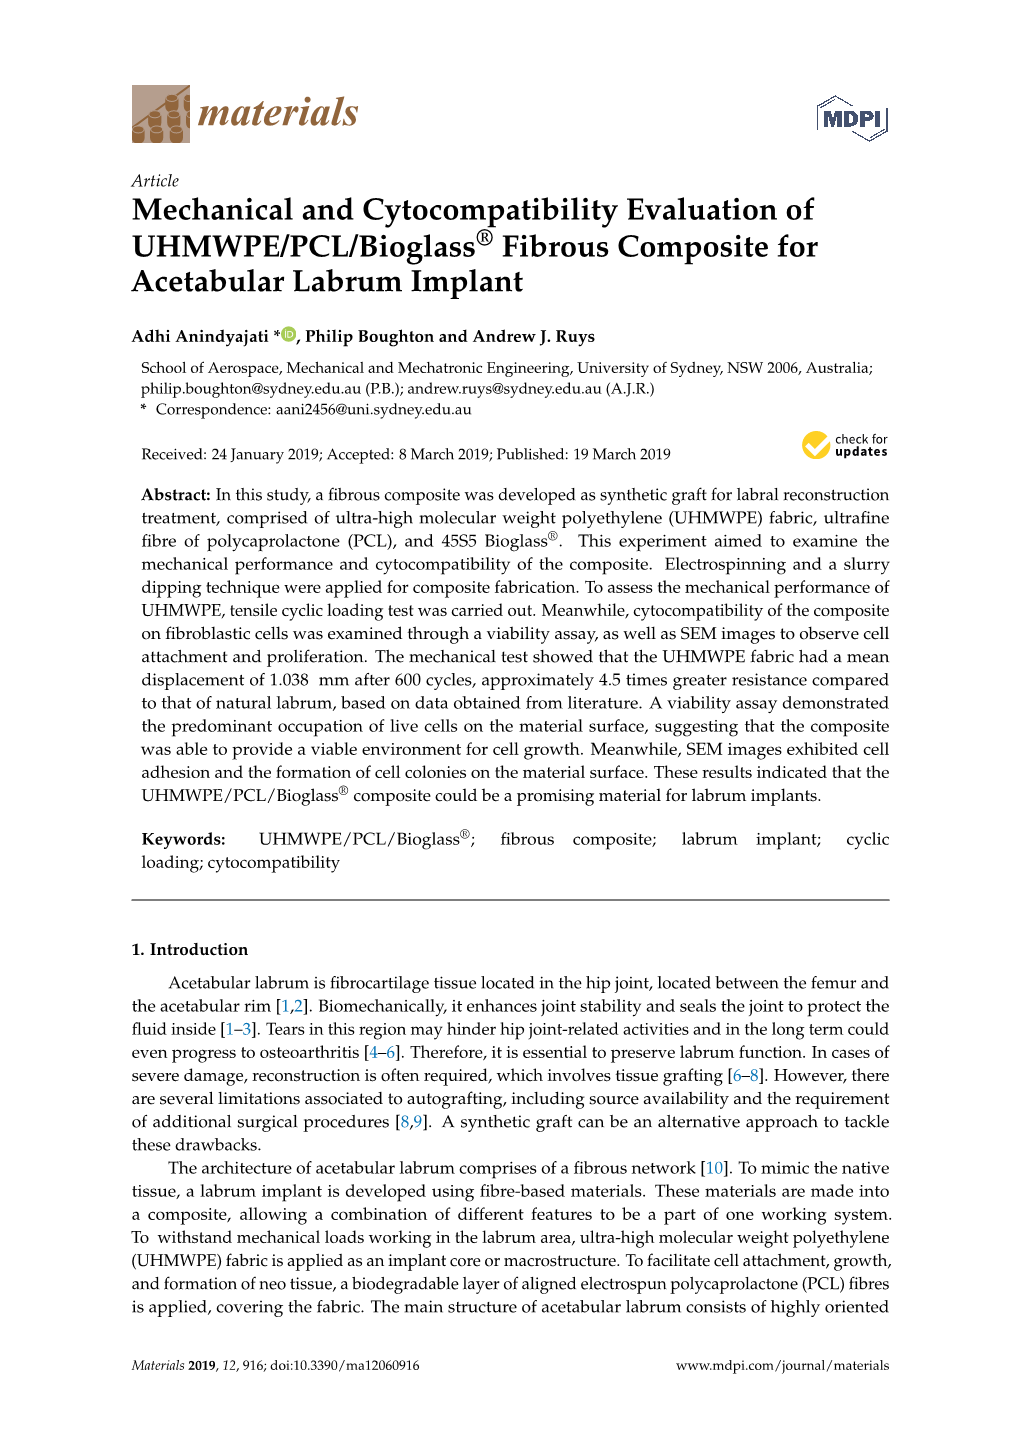 Mechanical and Cytocompatibility Evaluation of UHMWPE/PCL/Bioglass® Fibrous Composite for Acetabular Labrum Implant